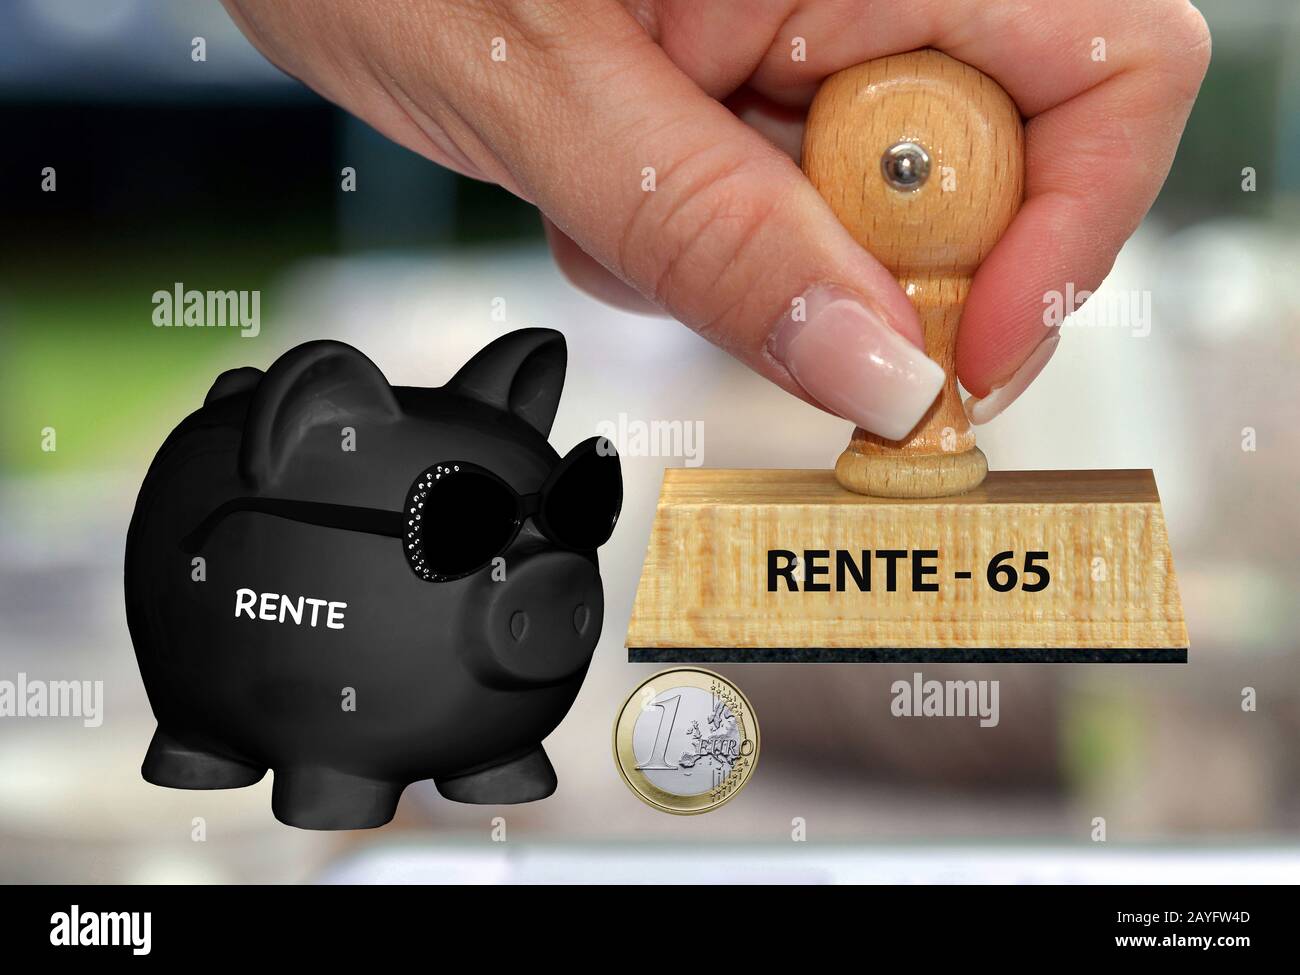 black piggy bank with sunglasses and lettering Rente, pension, stamp 'pension - 65' in background, composing Stock Photo